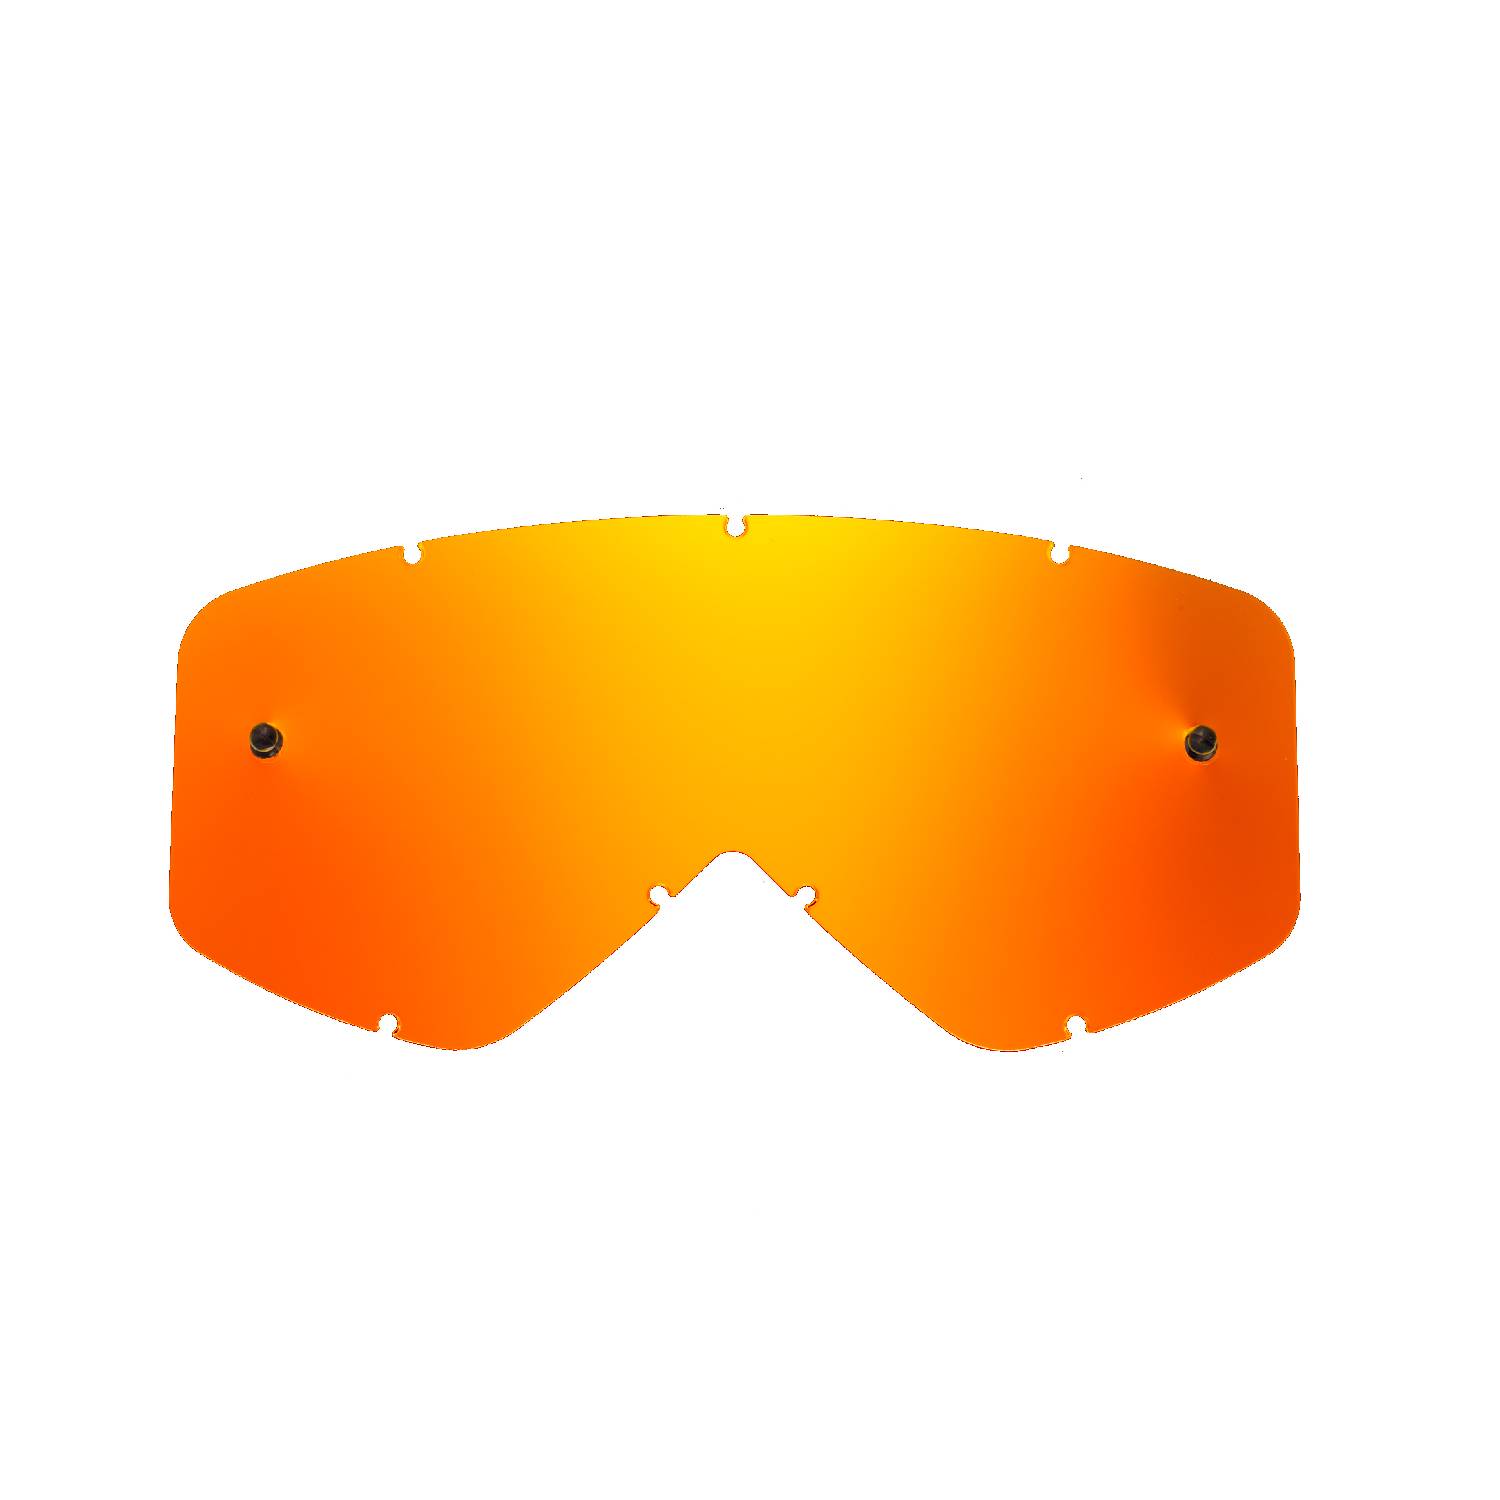 orange-toned mirrored replacement lenses for goggles compatible for Smith Fuel / Intake / V1 / V2 goggle